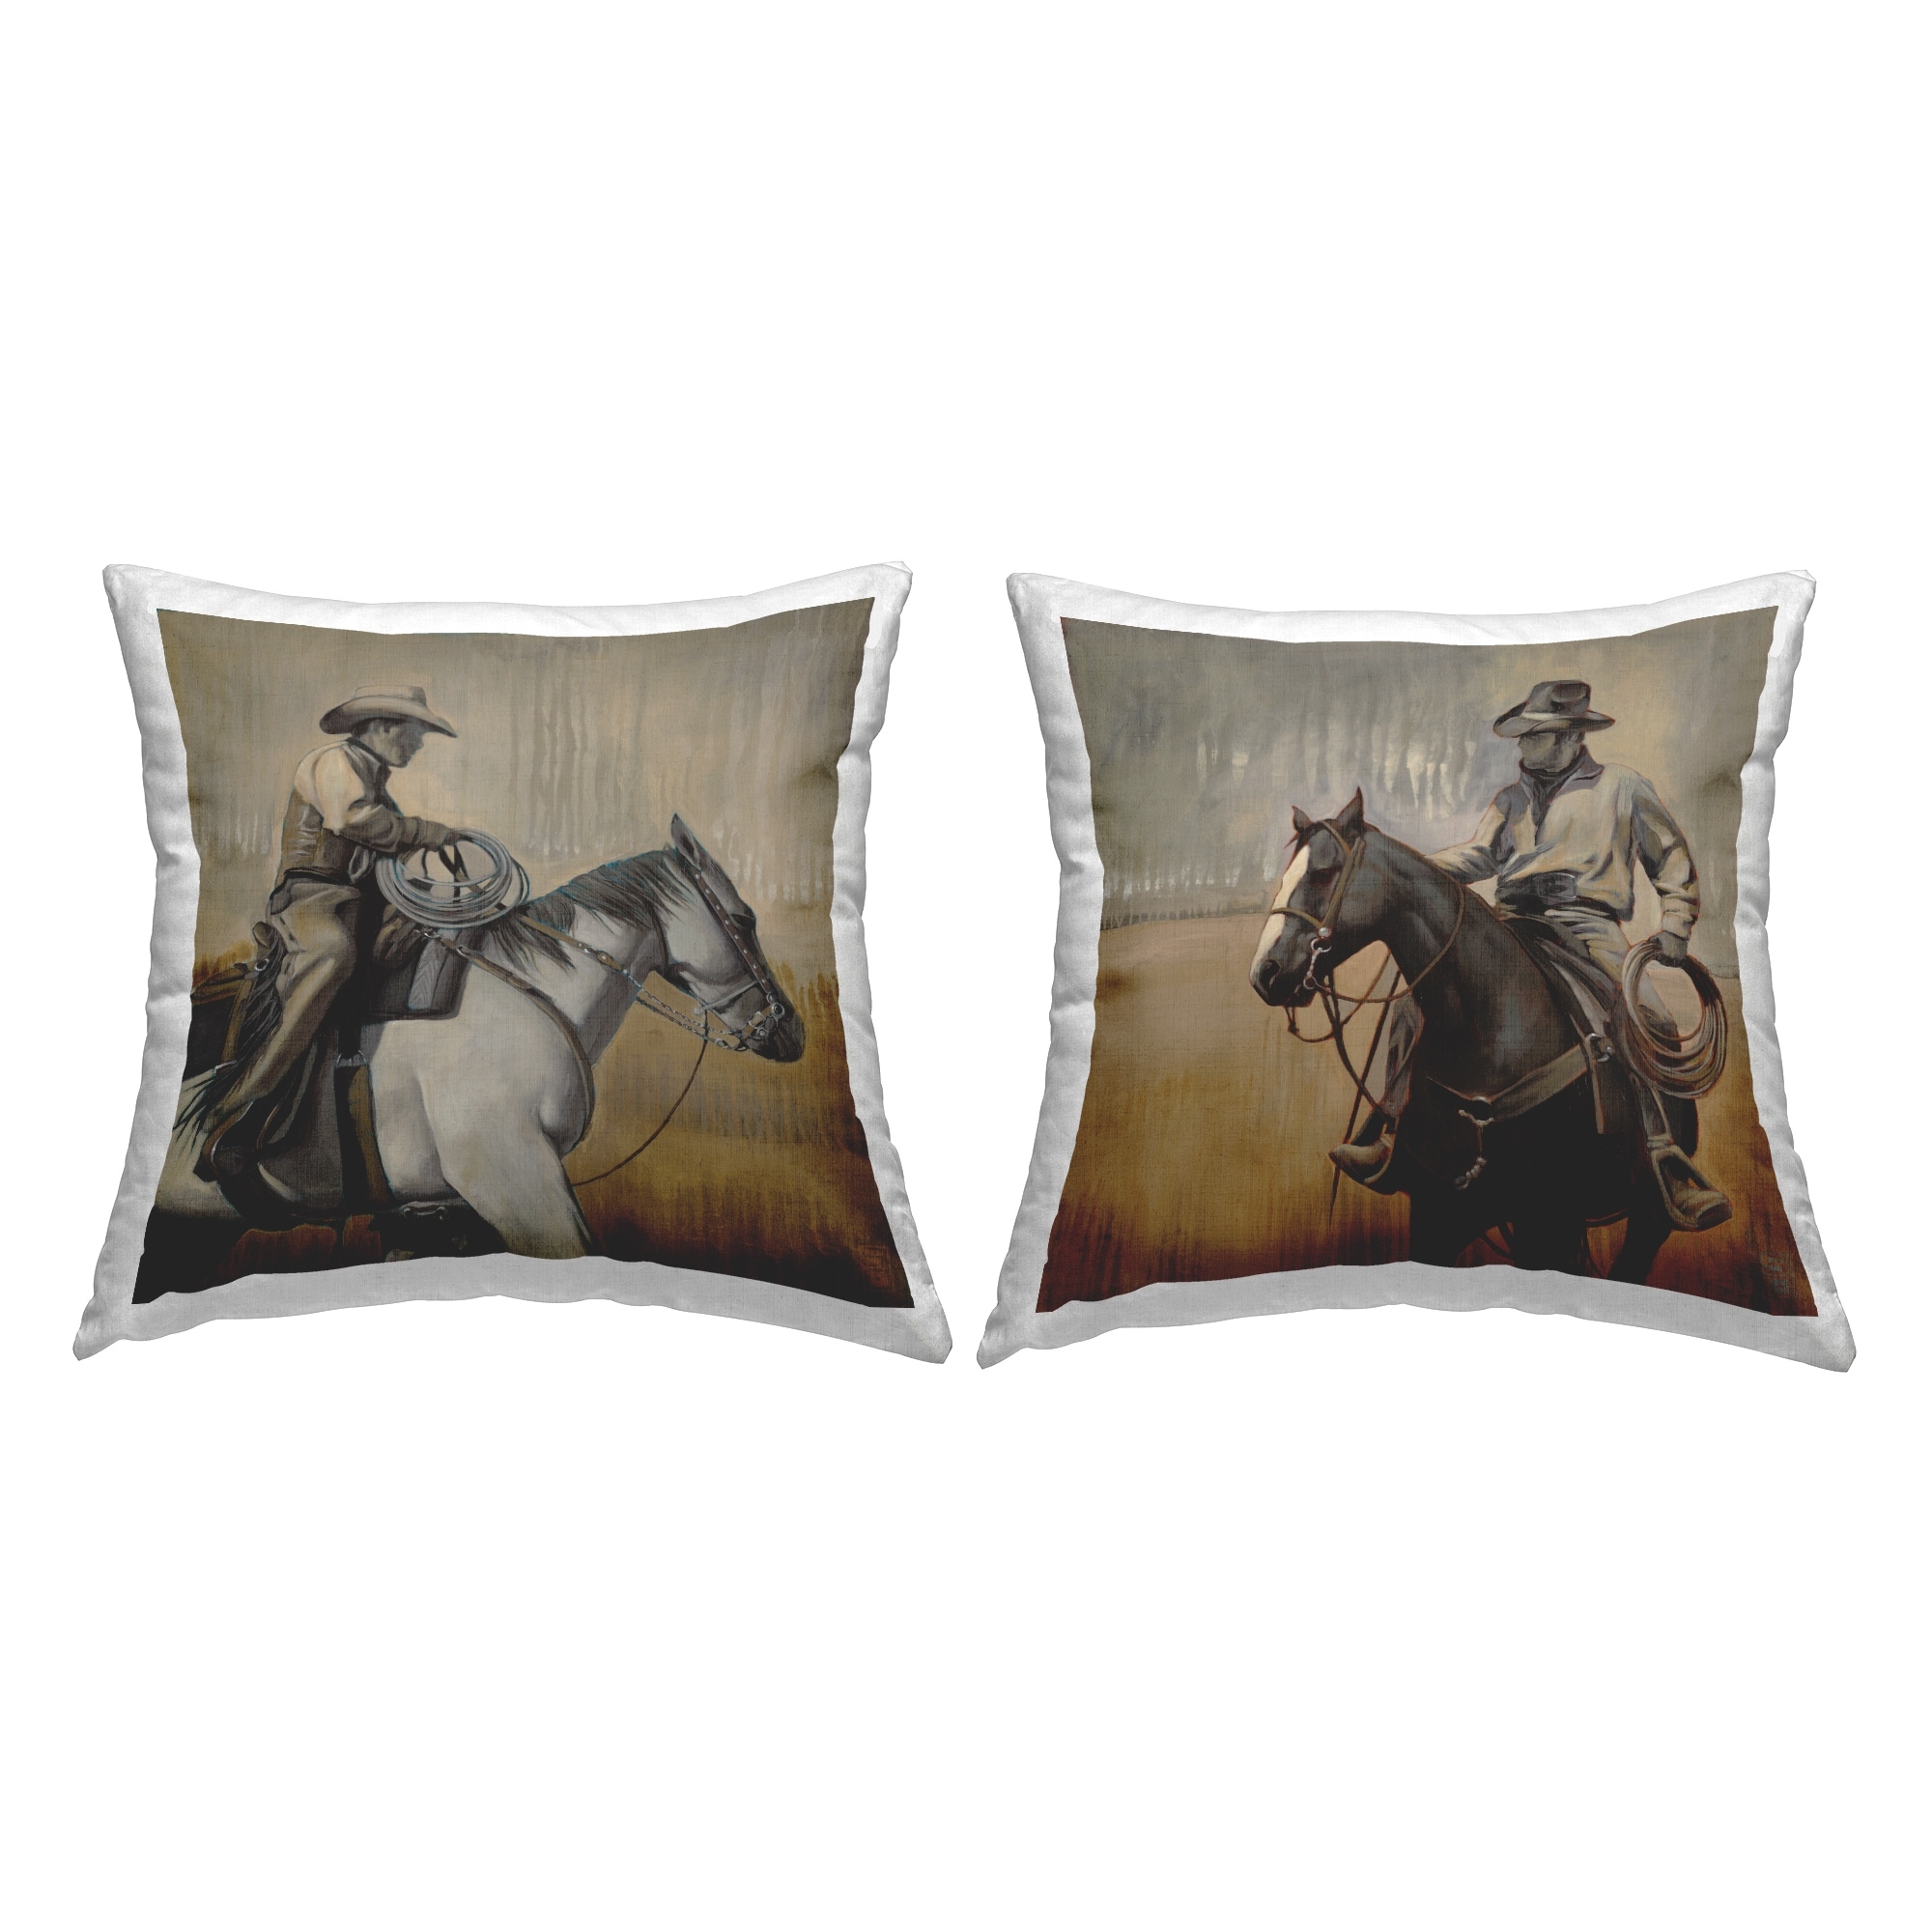 Stupell Western Cowboys Rustic Scene Printed Throw Pillow Design by Stacy  Daguiar (Set of 2) - On Sale - Bed Bath & Beyond - 37955197